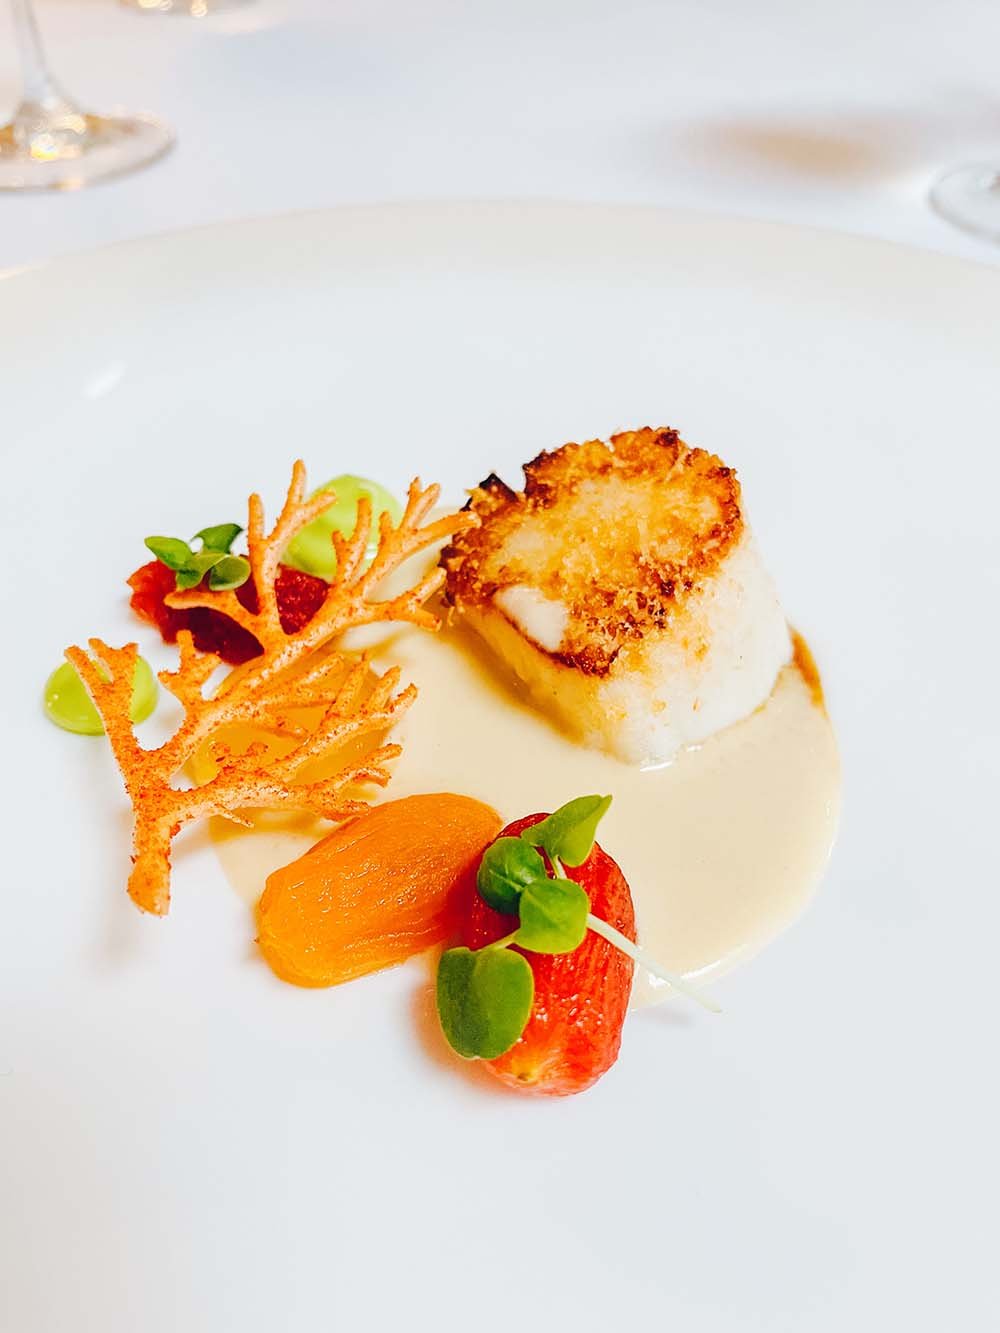 Orkney Scallop as part of the 5 course tasting menu at Northcote Manor